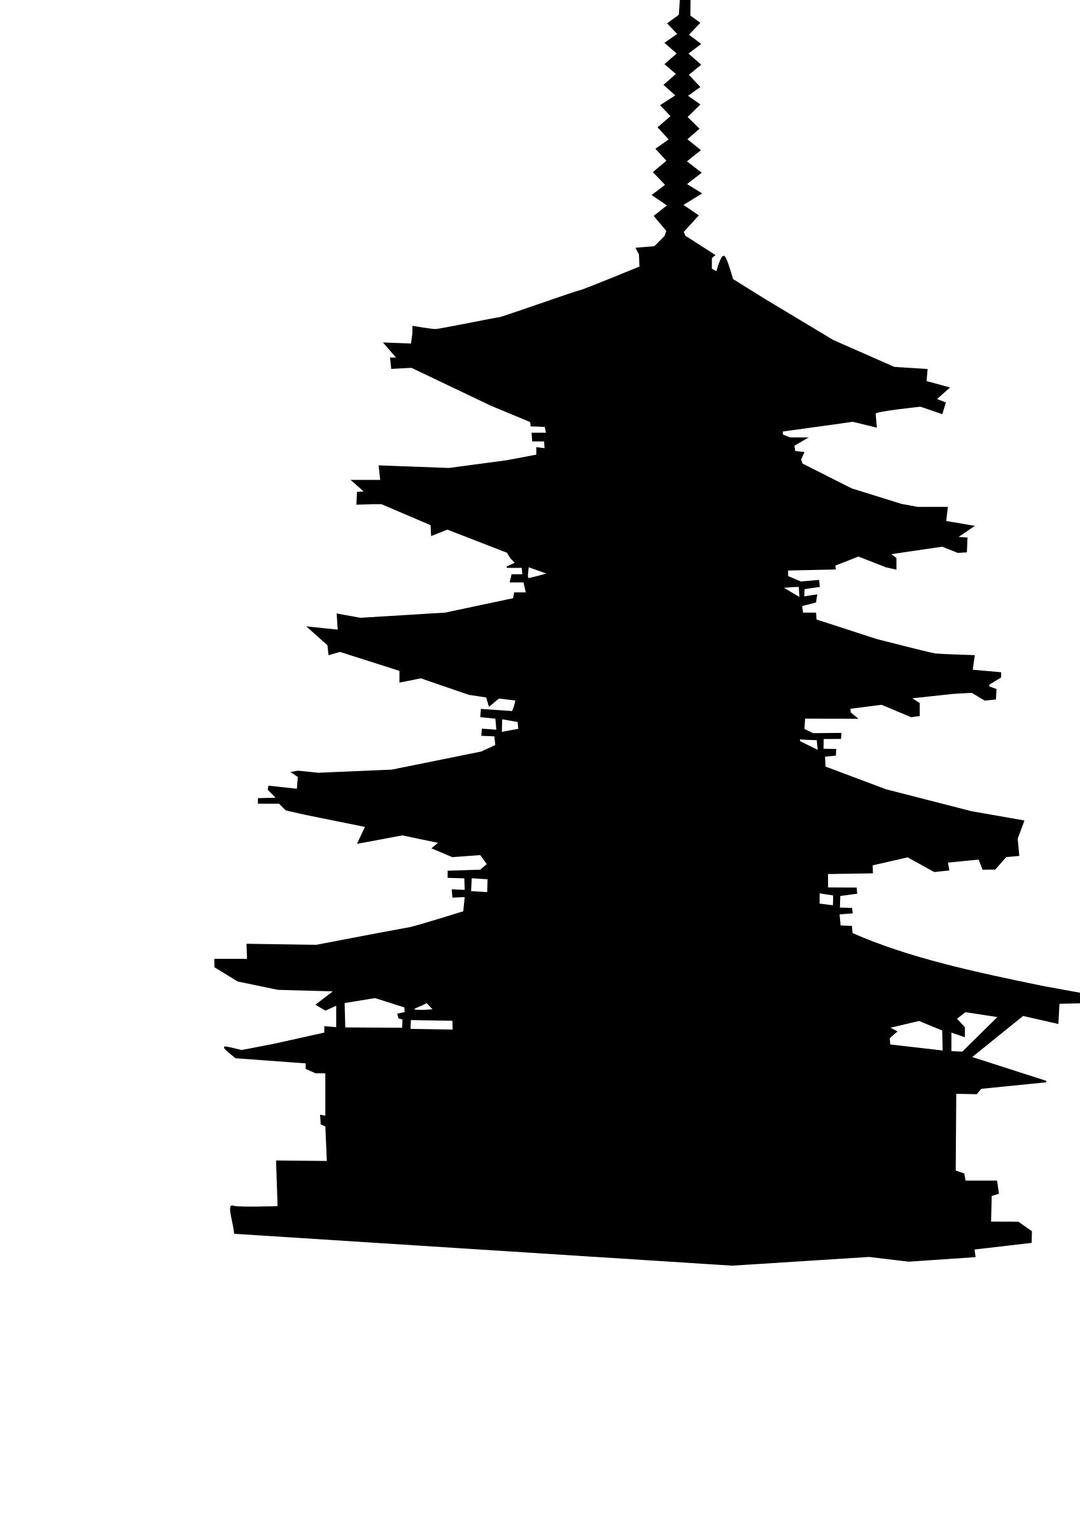 Pagoda Silhouette png transparent